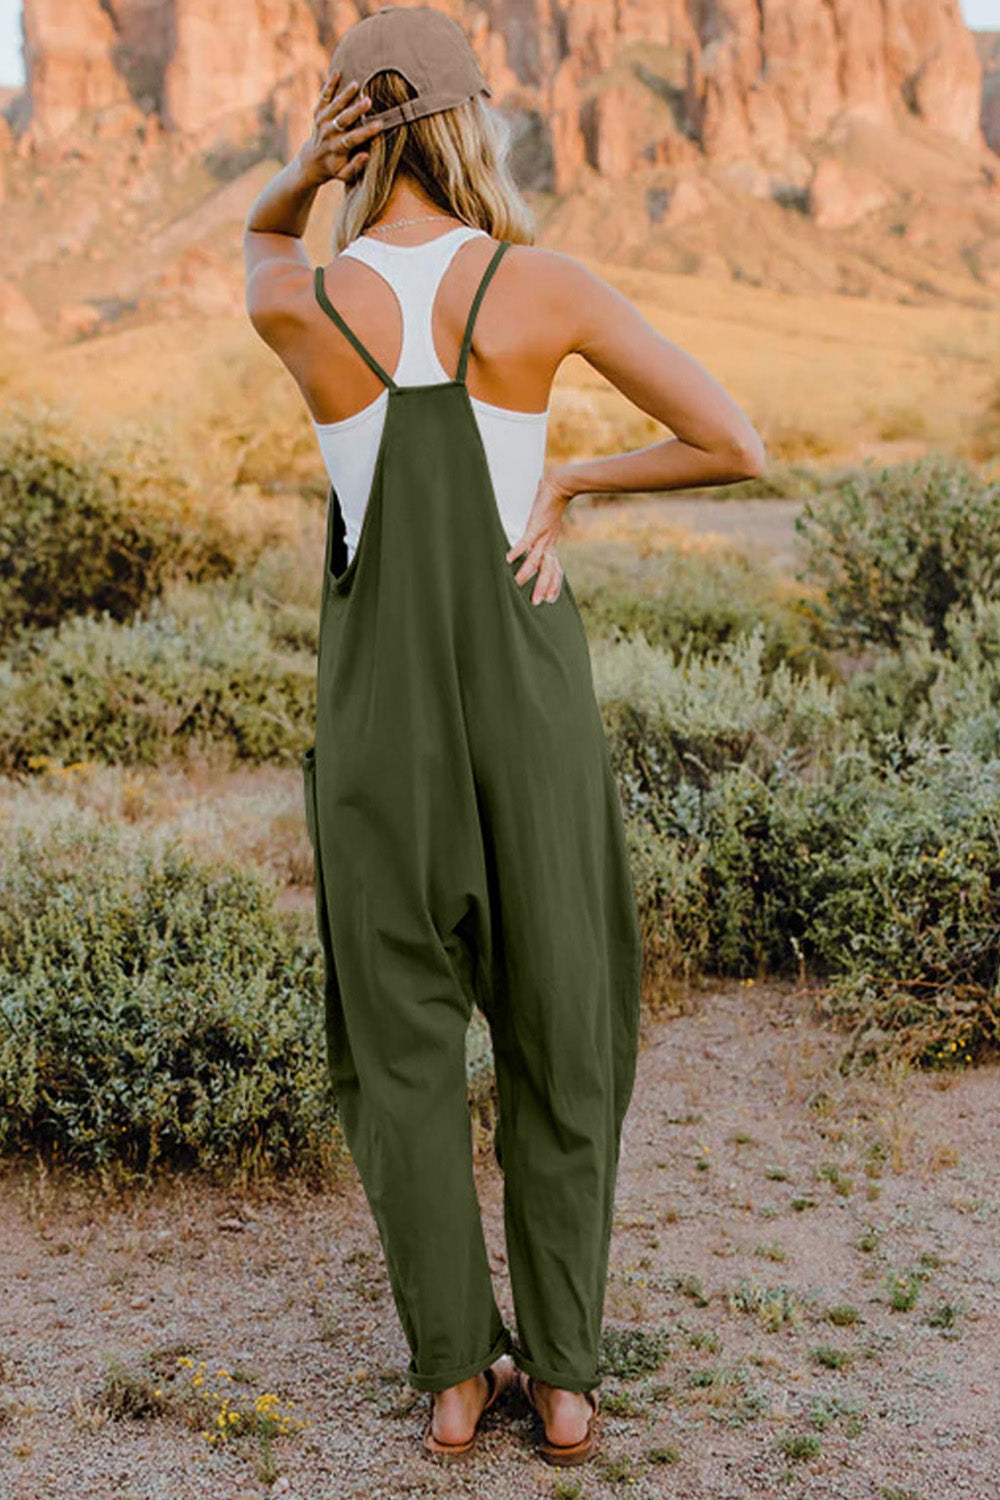 Double Take  V-Neck Sleeveless Jumpsuit with Pocket [CLICK FOR MORE]